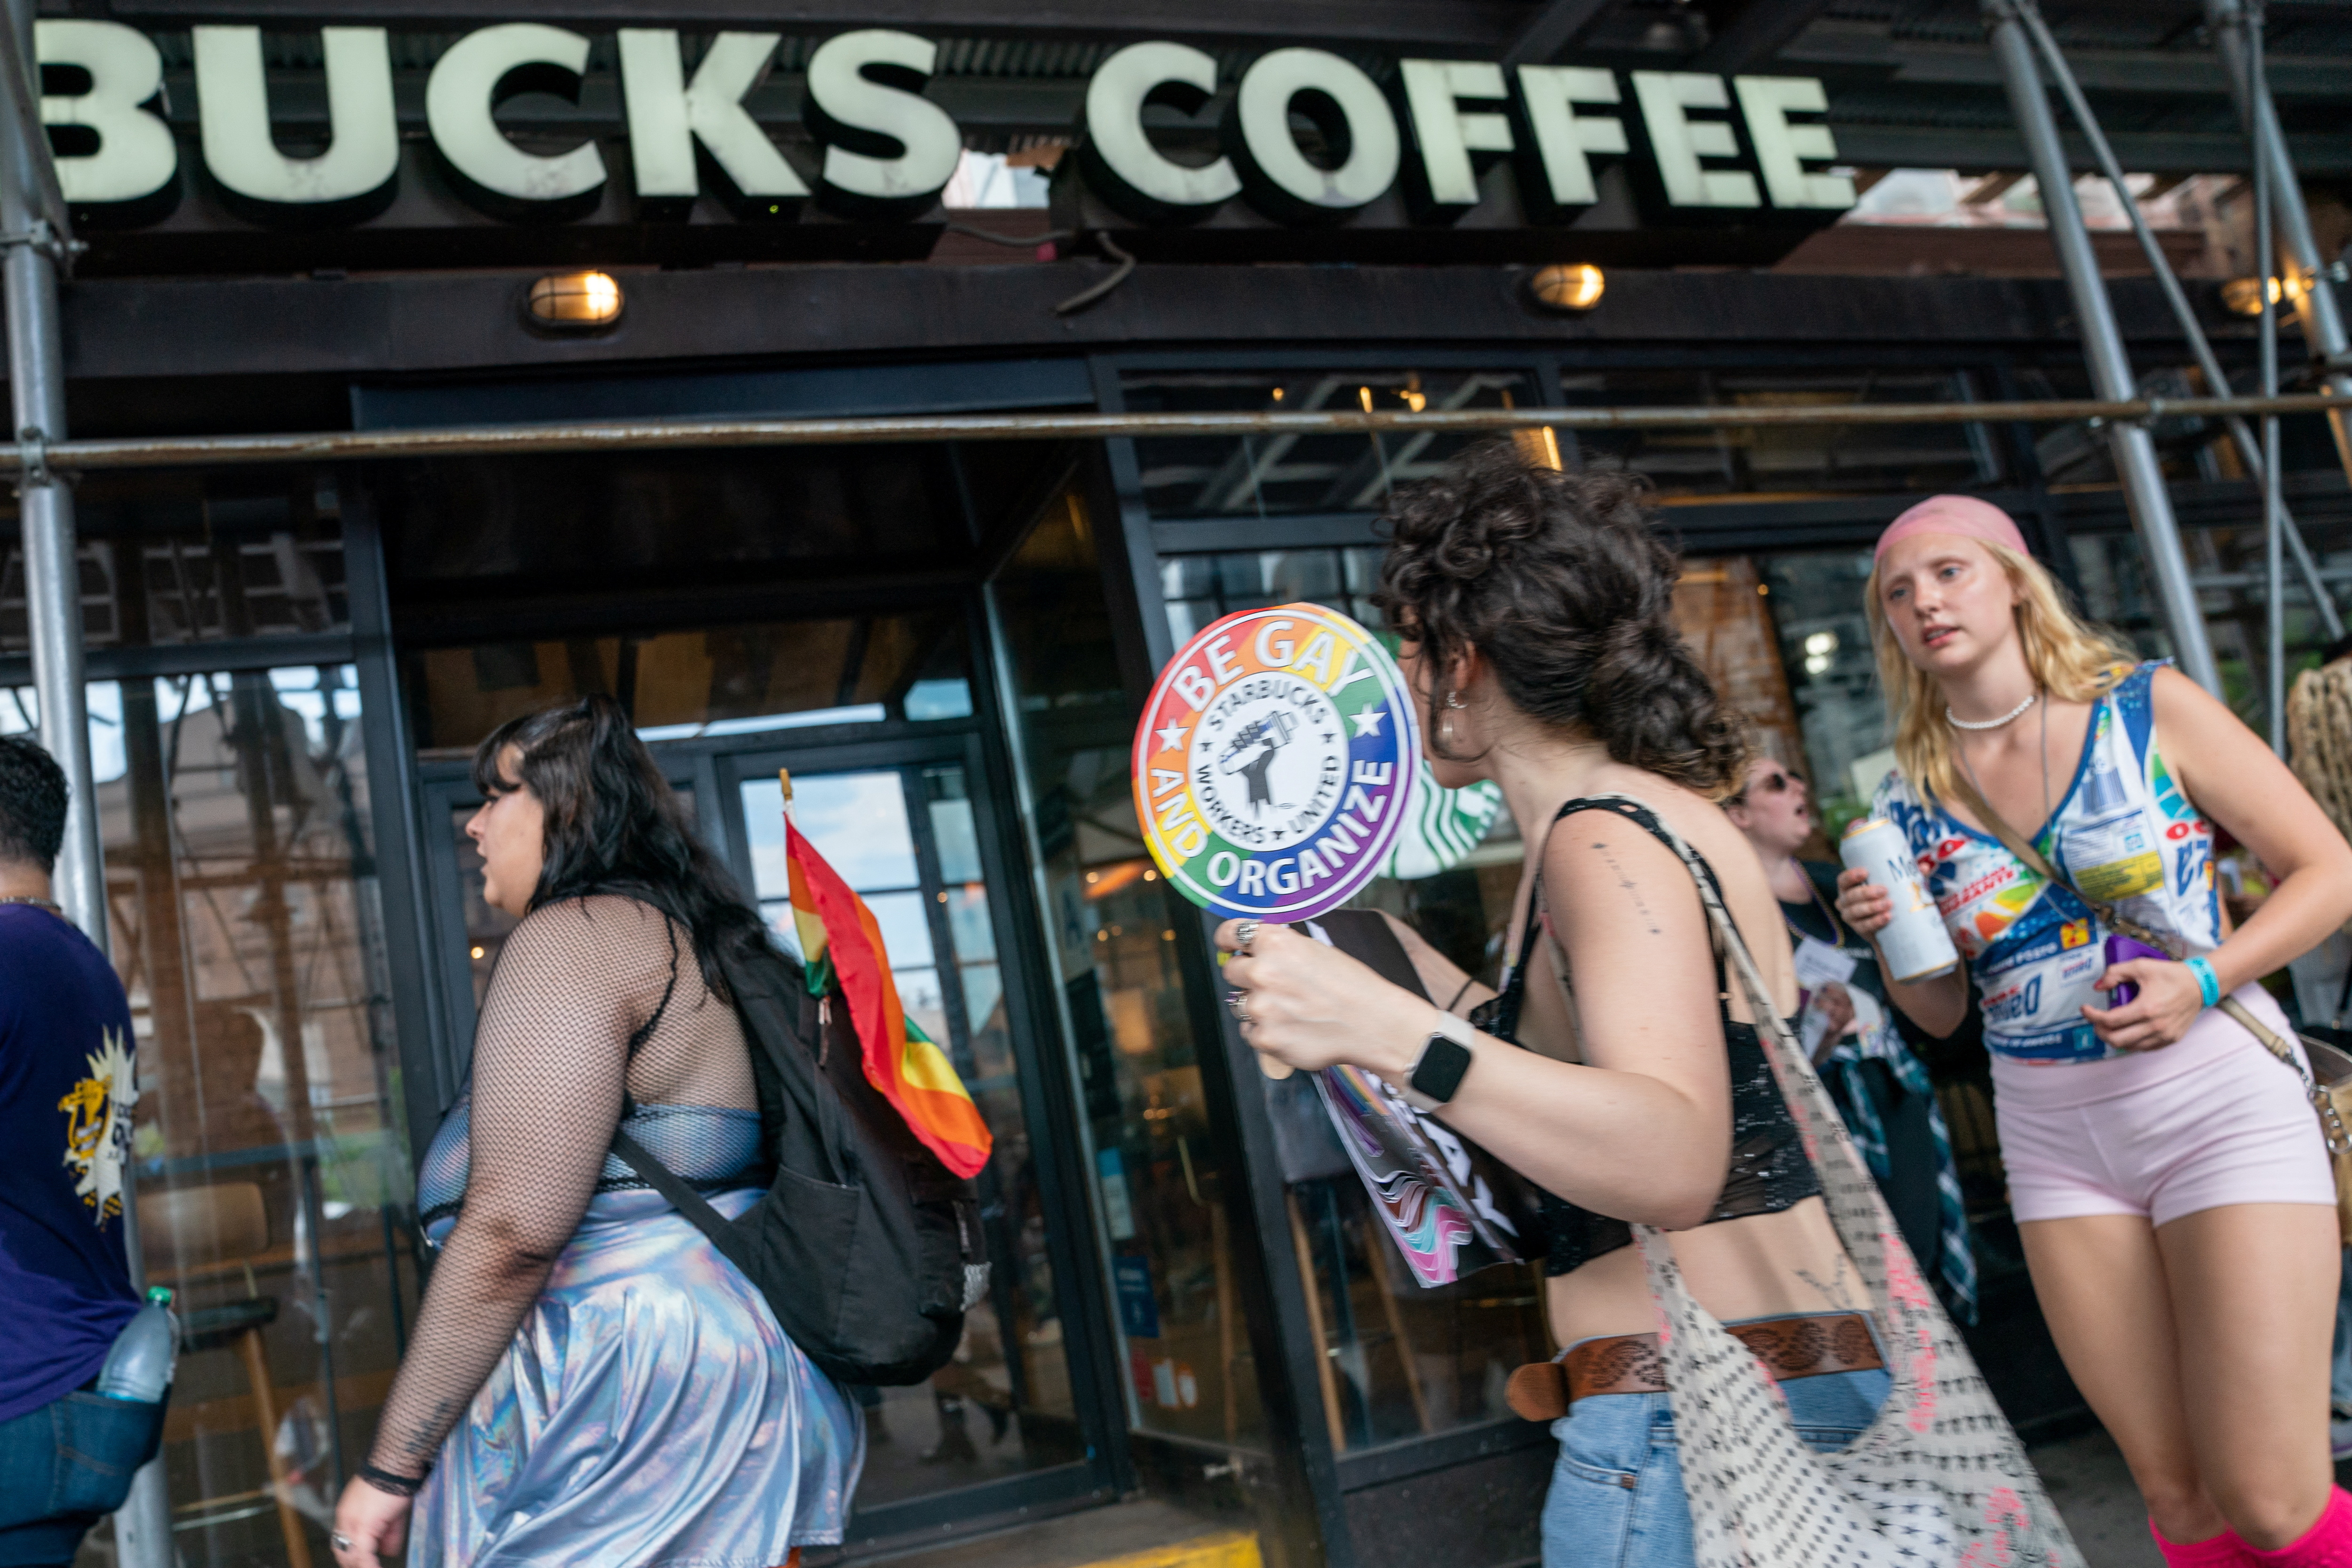 Starbucks Responds to Straw Ban Backlash - Disability Rights Groups on  Starbucks